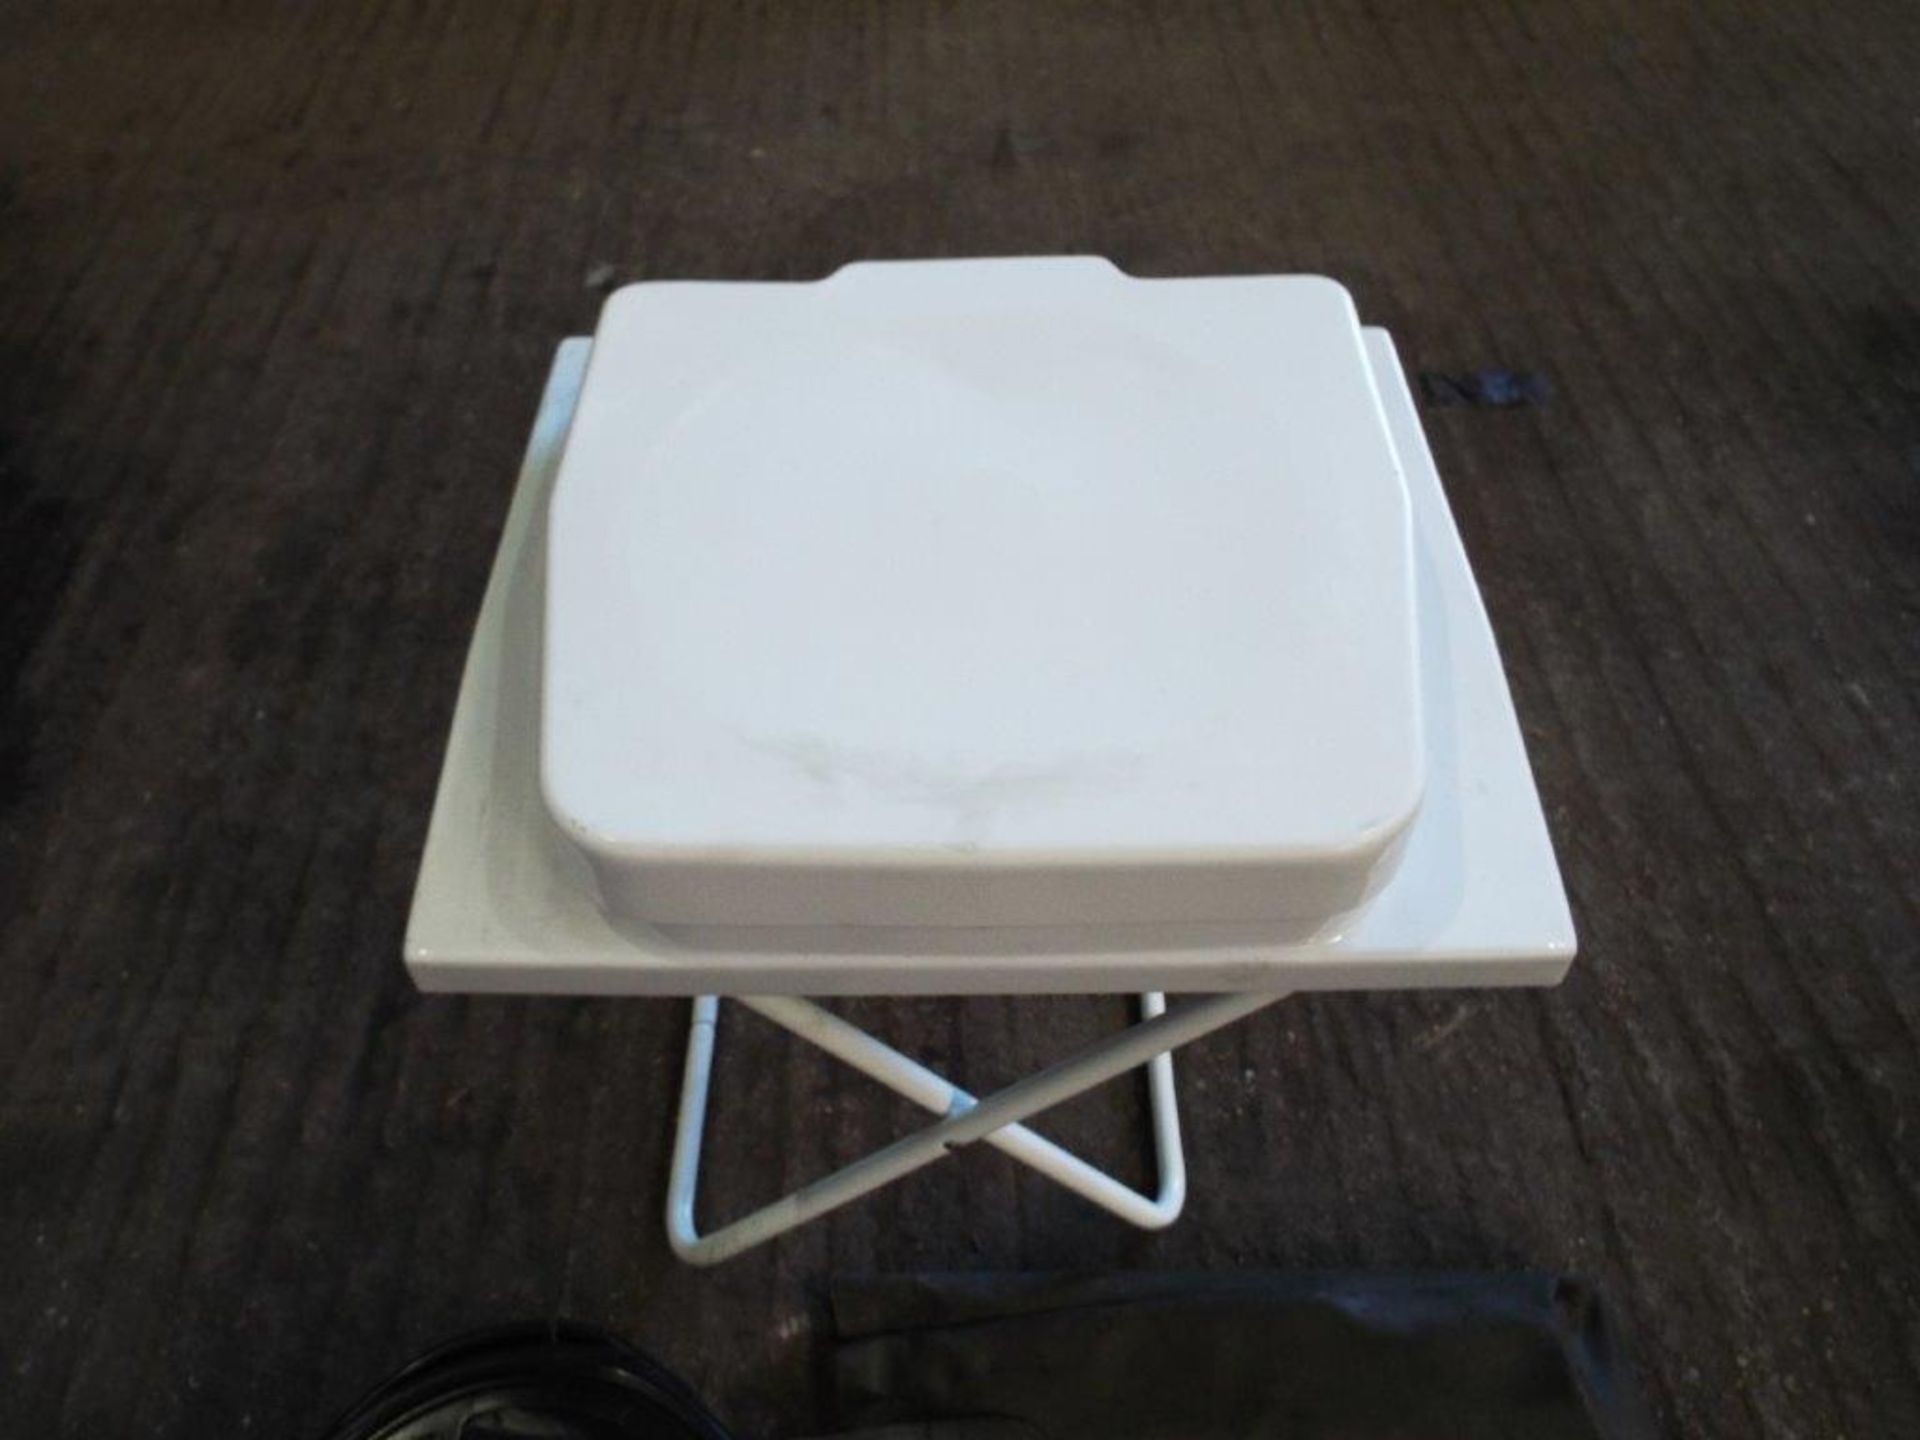 Klean-Contor Military Camp Toilet Complete with Disposable Bags and Carry Case - Image 3 of 8